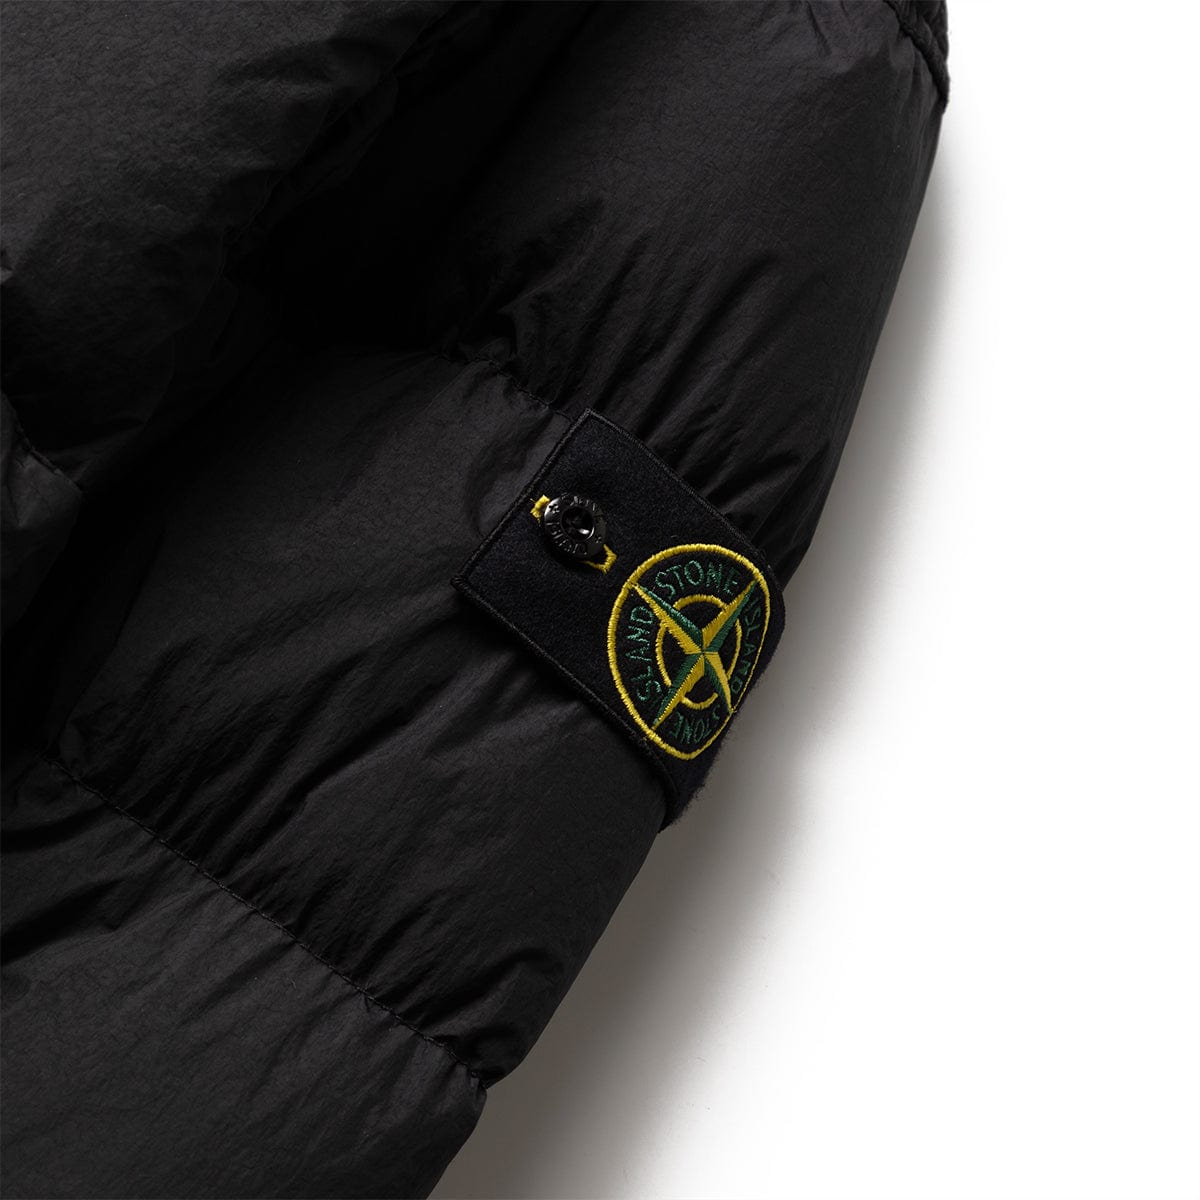 Stone Island Outerwear CRINKLED DOWN JACKET 791540623